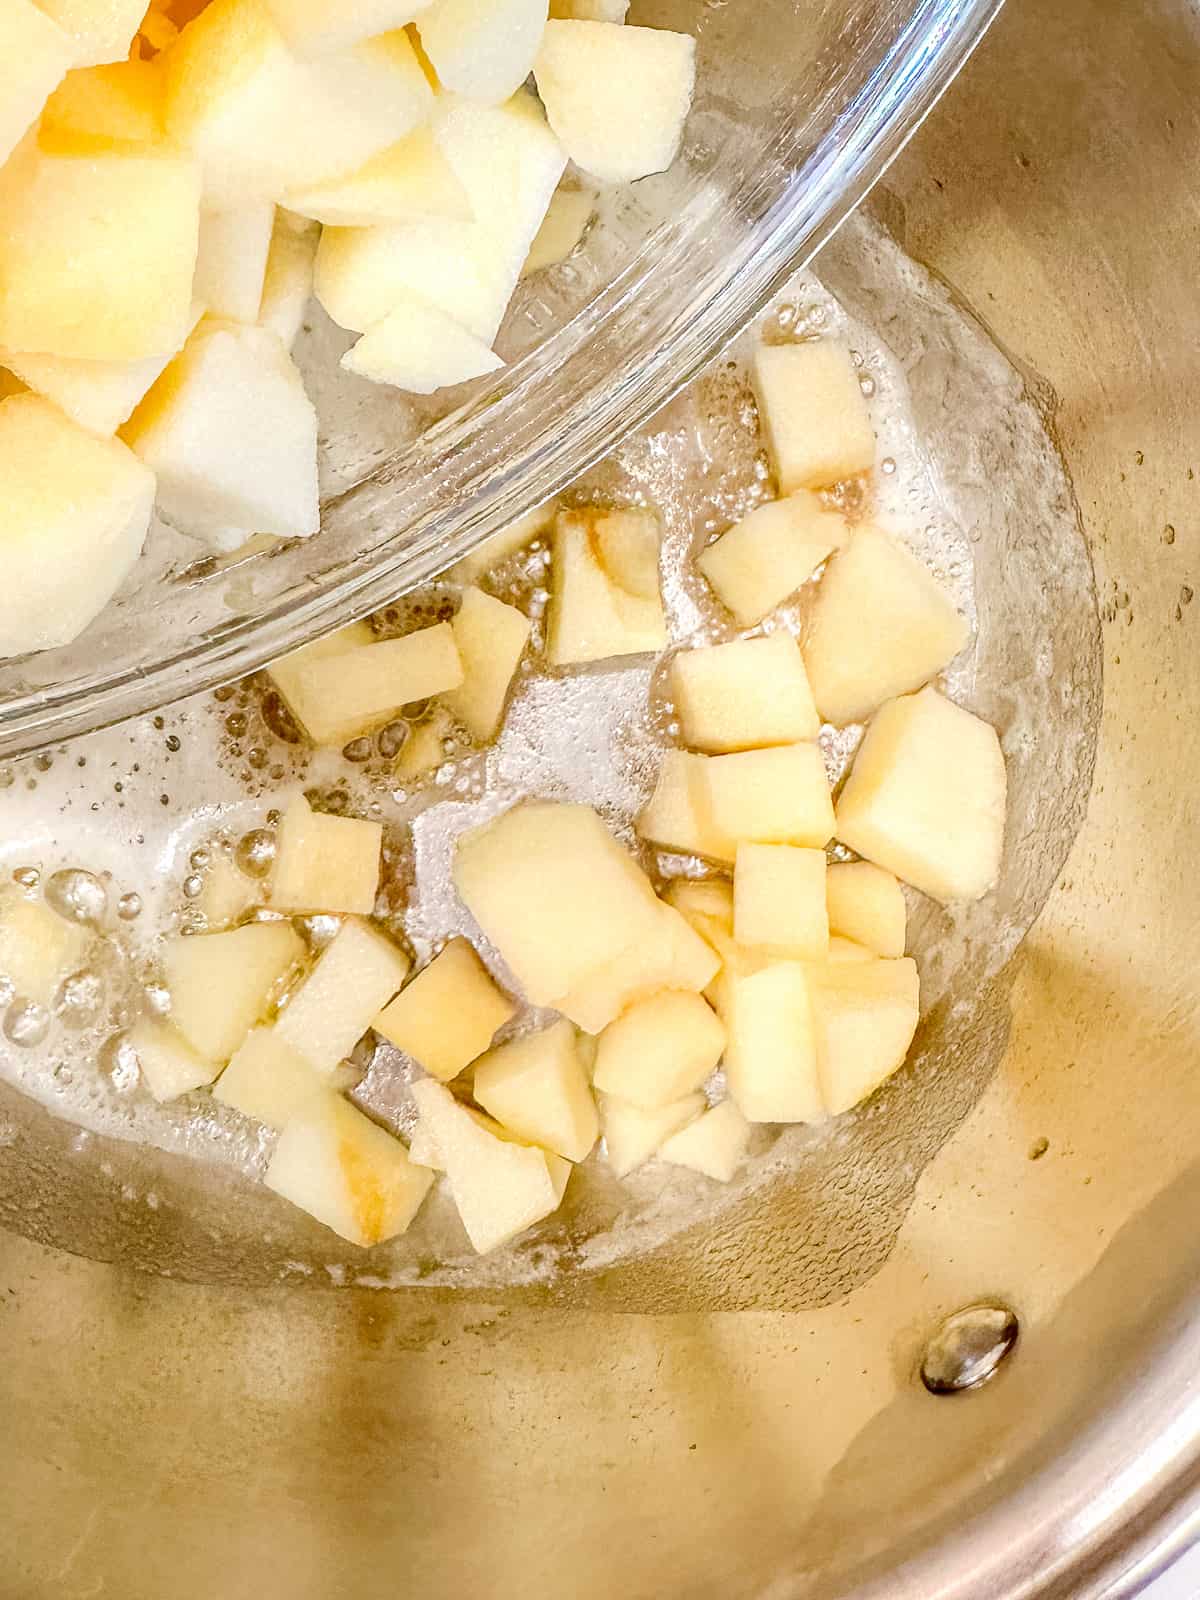 Adding apples to brown butter in a pot.